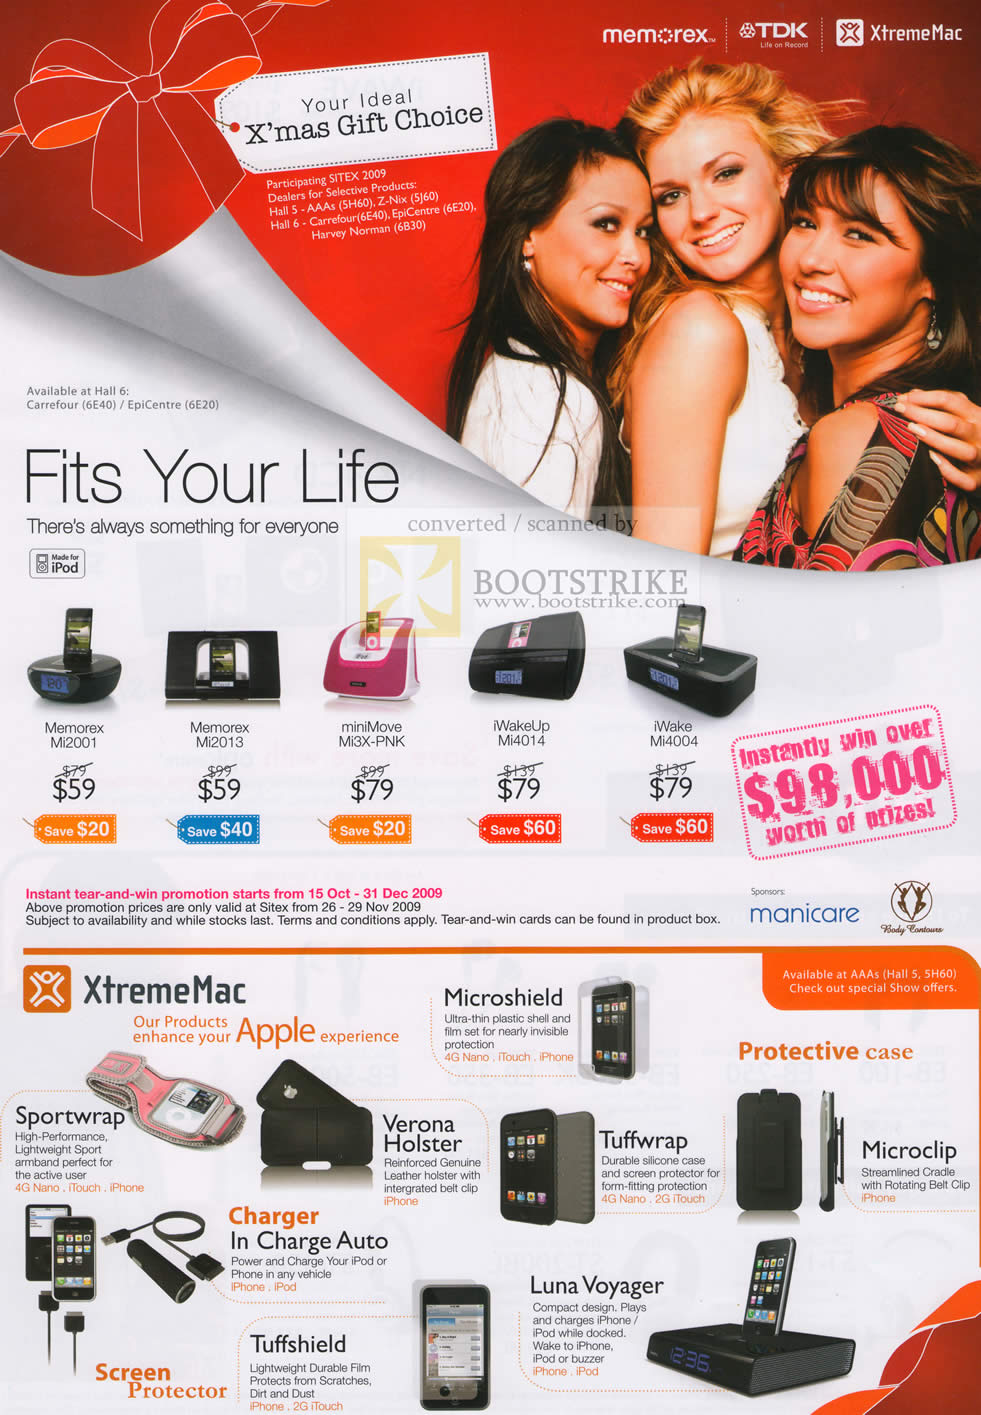 Sitex 2009 price list image brochure of Memorex IPod Accessories XtremeMac Armband Tuffwrap Charger Screen Protector